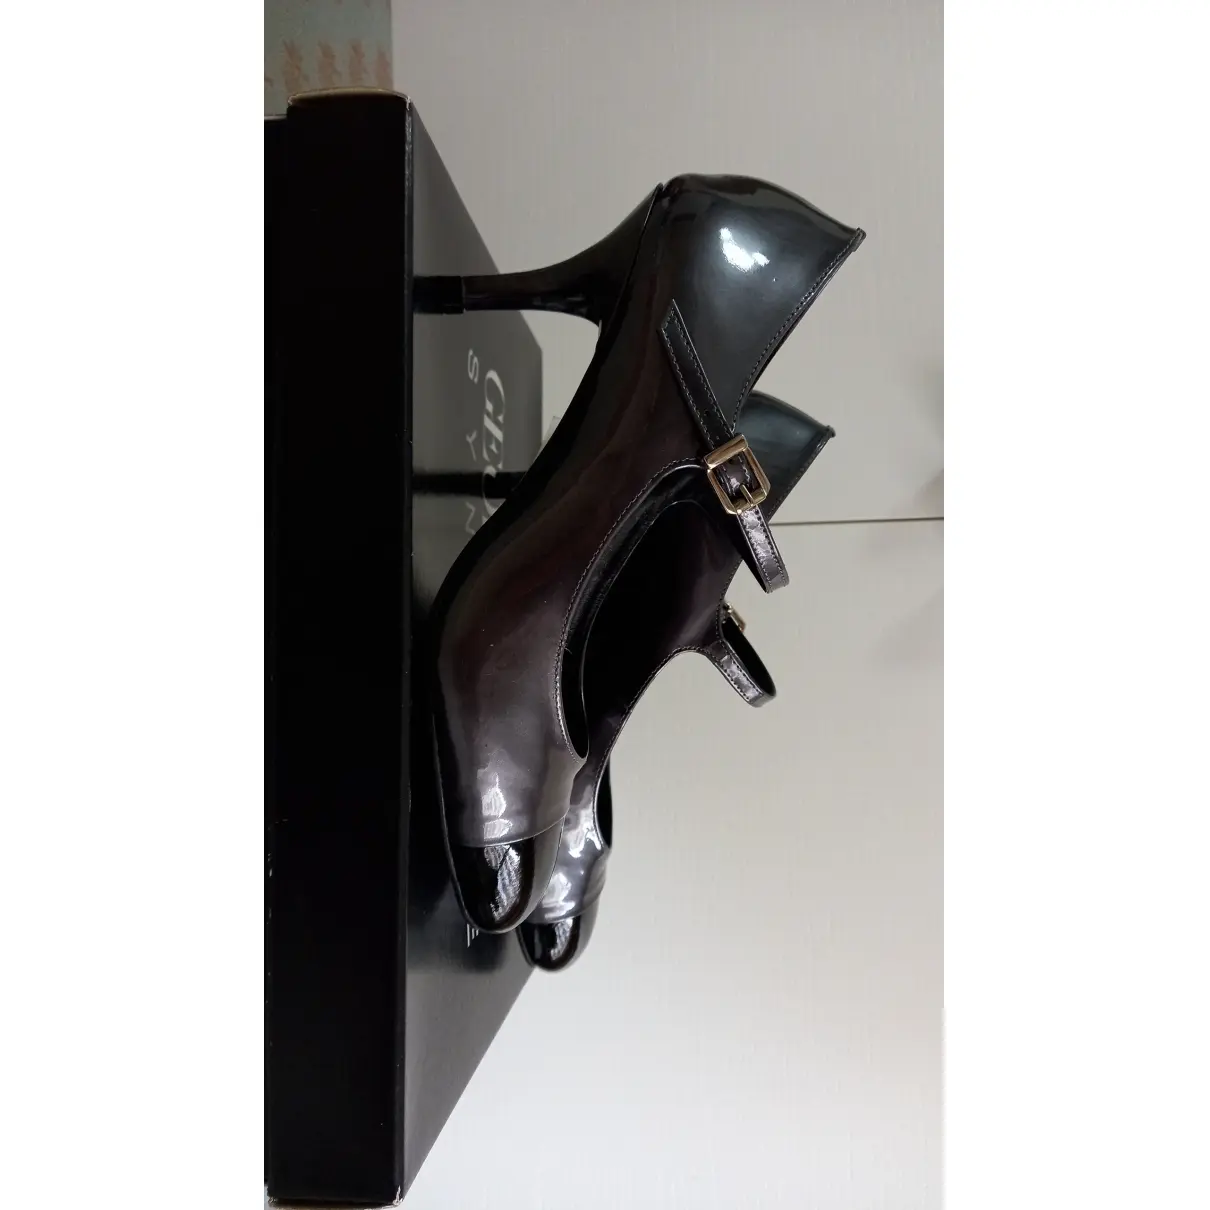 Patent leather heels Georges Rech